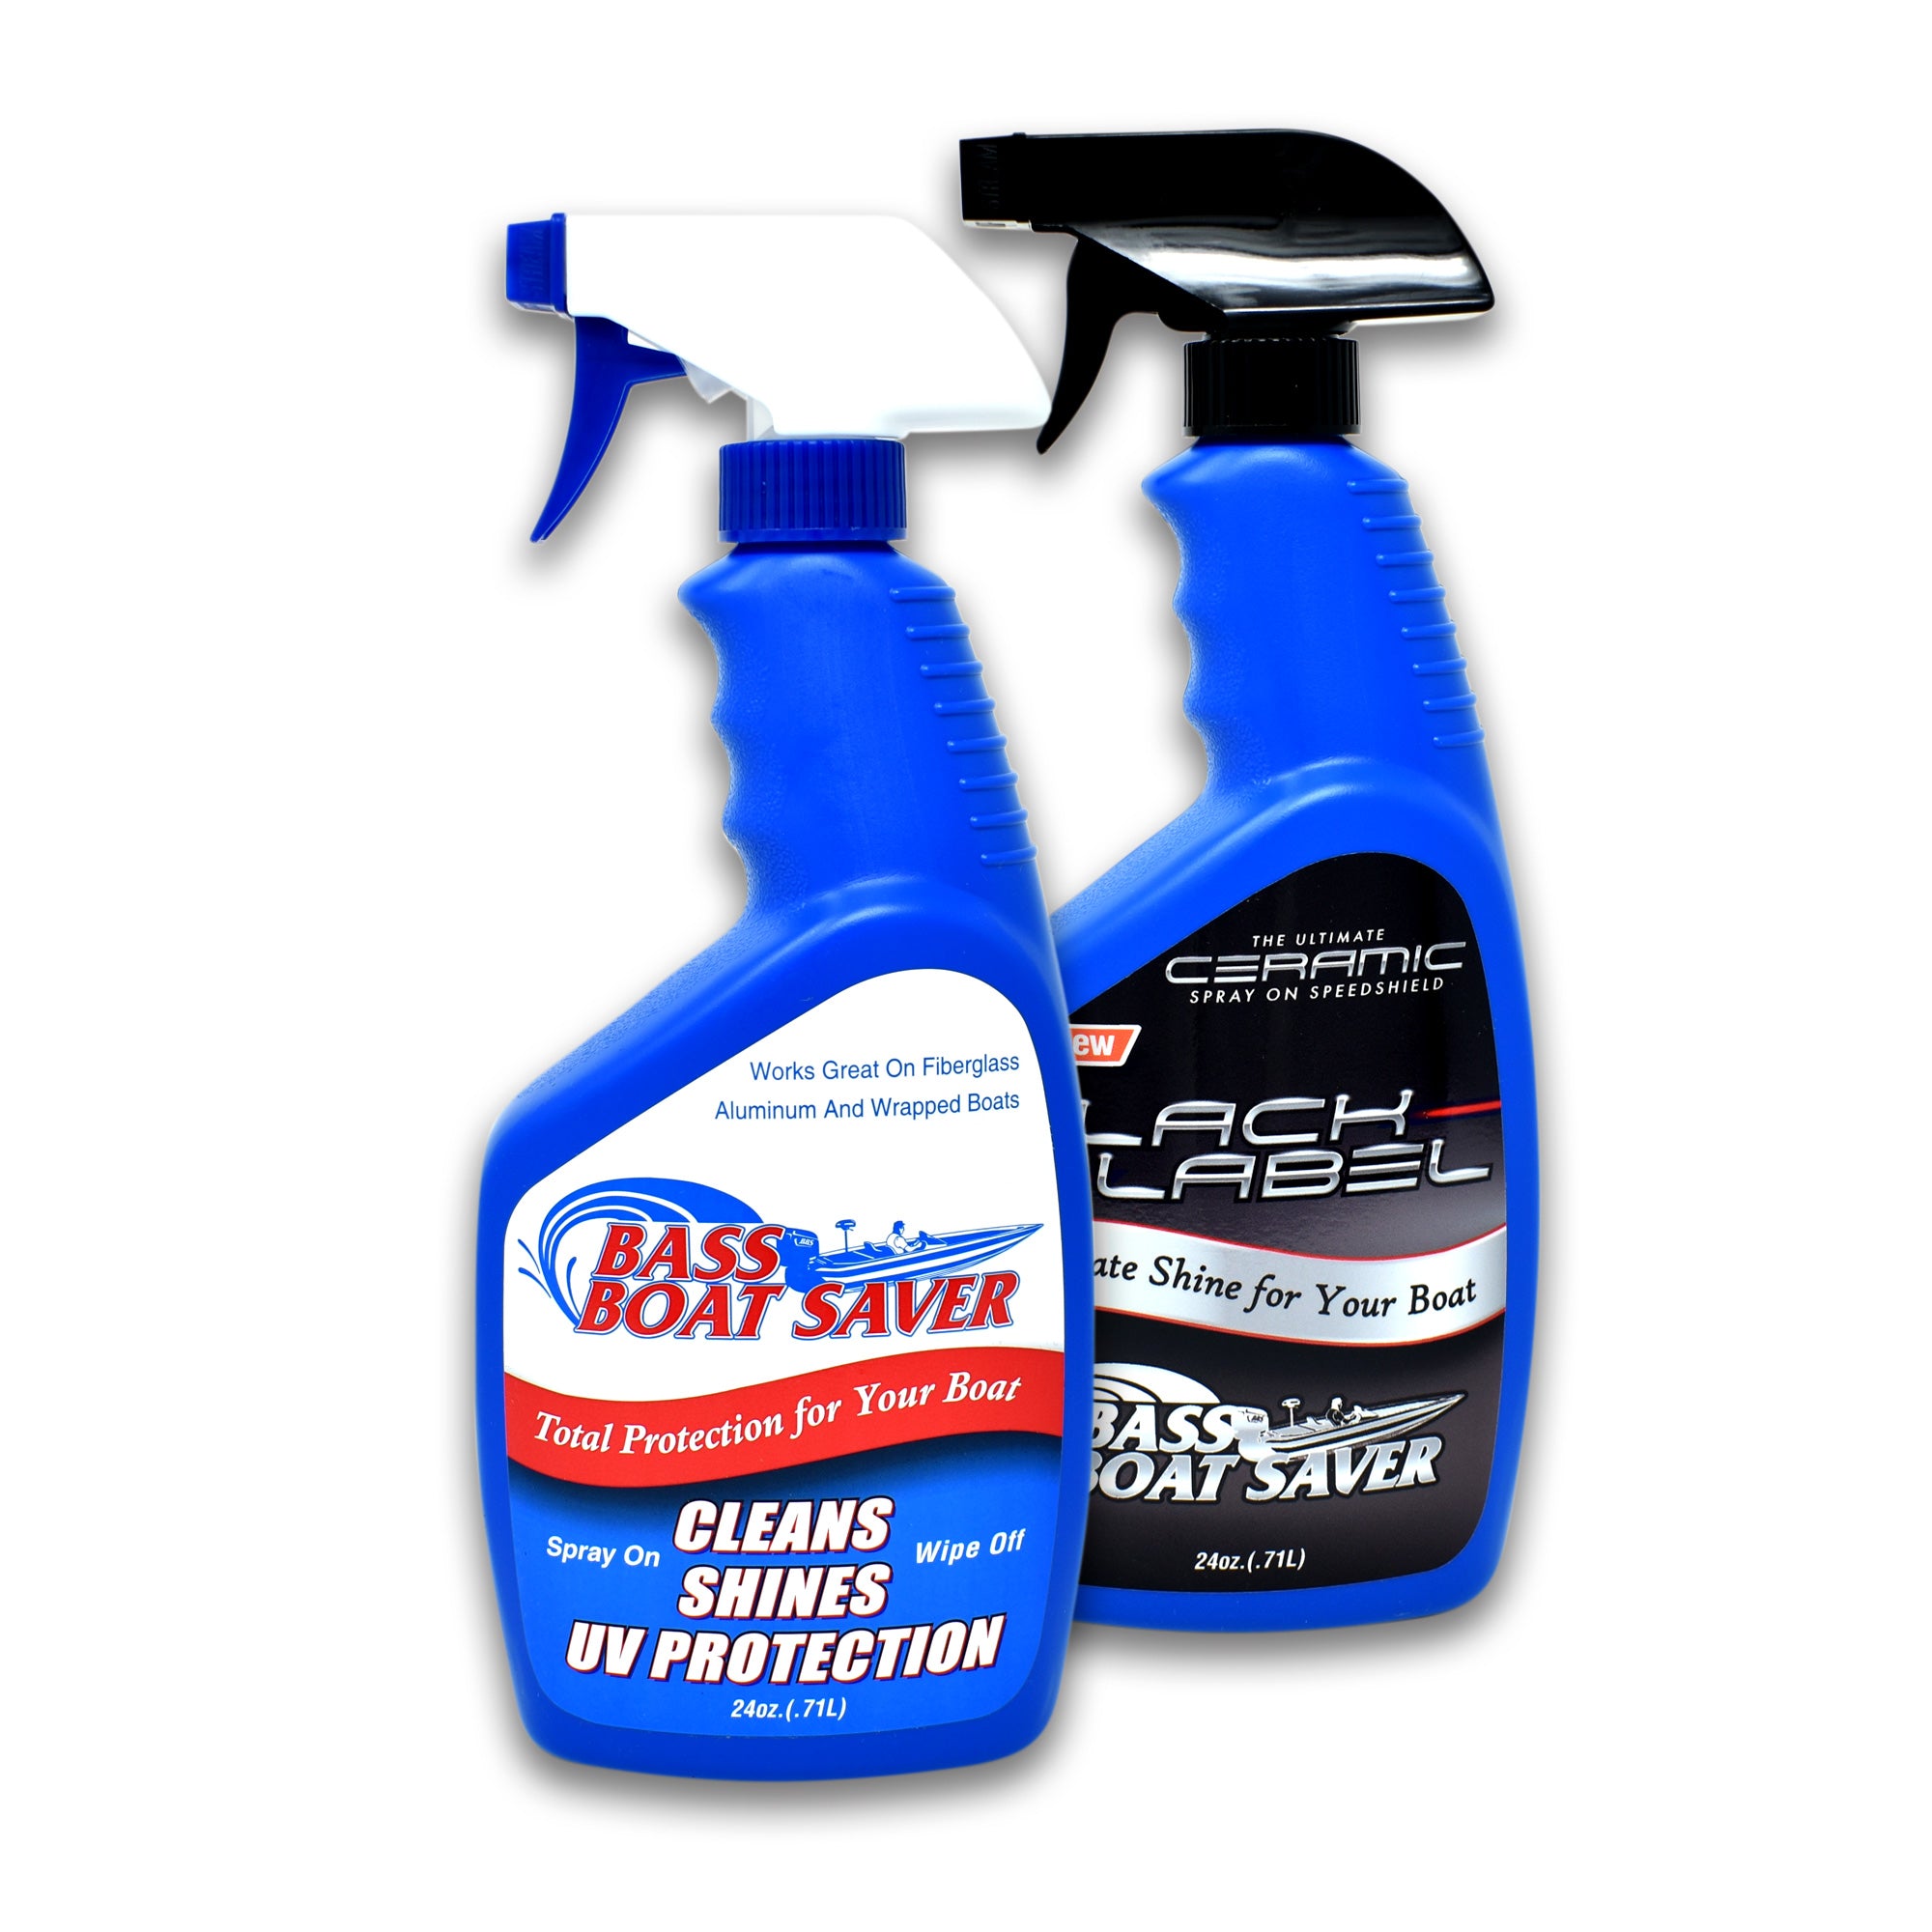 Bass Boat Saver Black Label Ceramic Spray Giveaway Winners - Wired2Fish